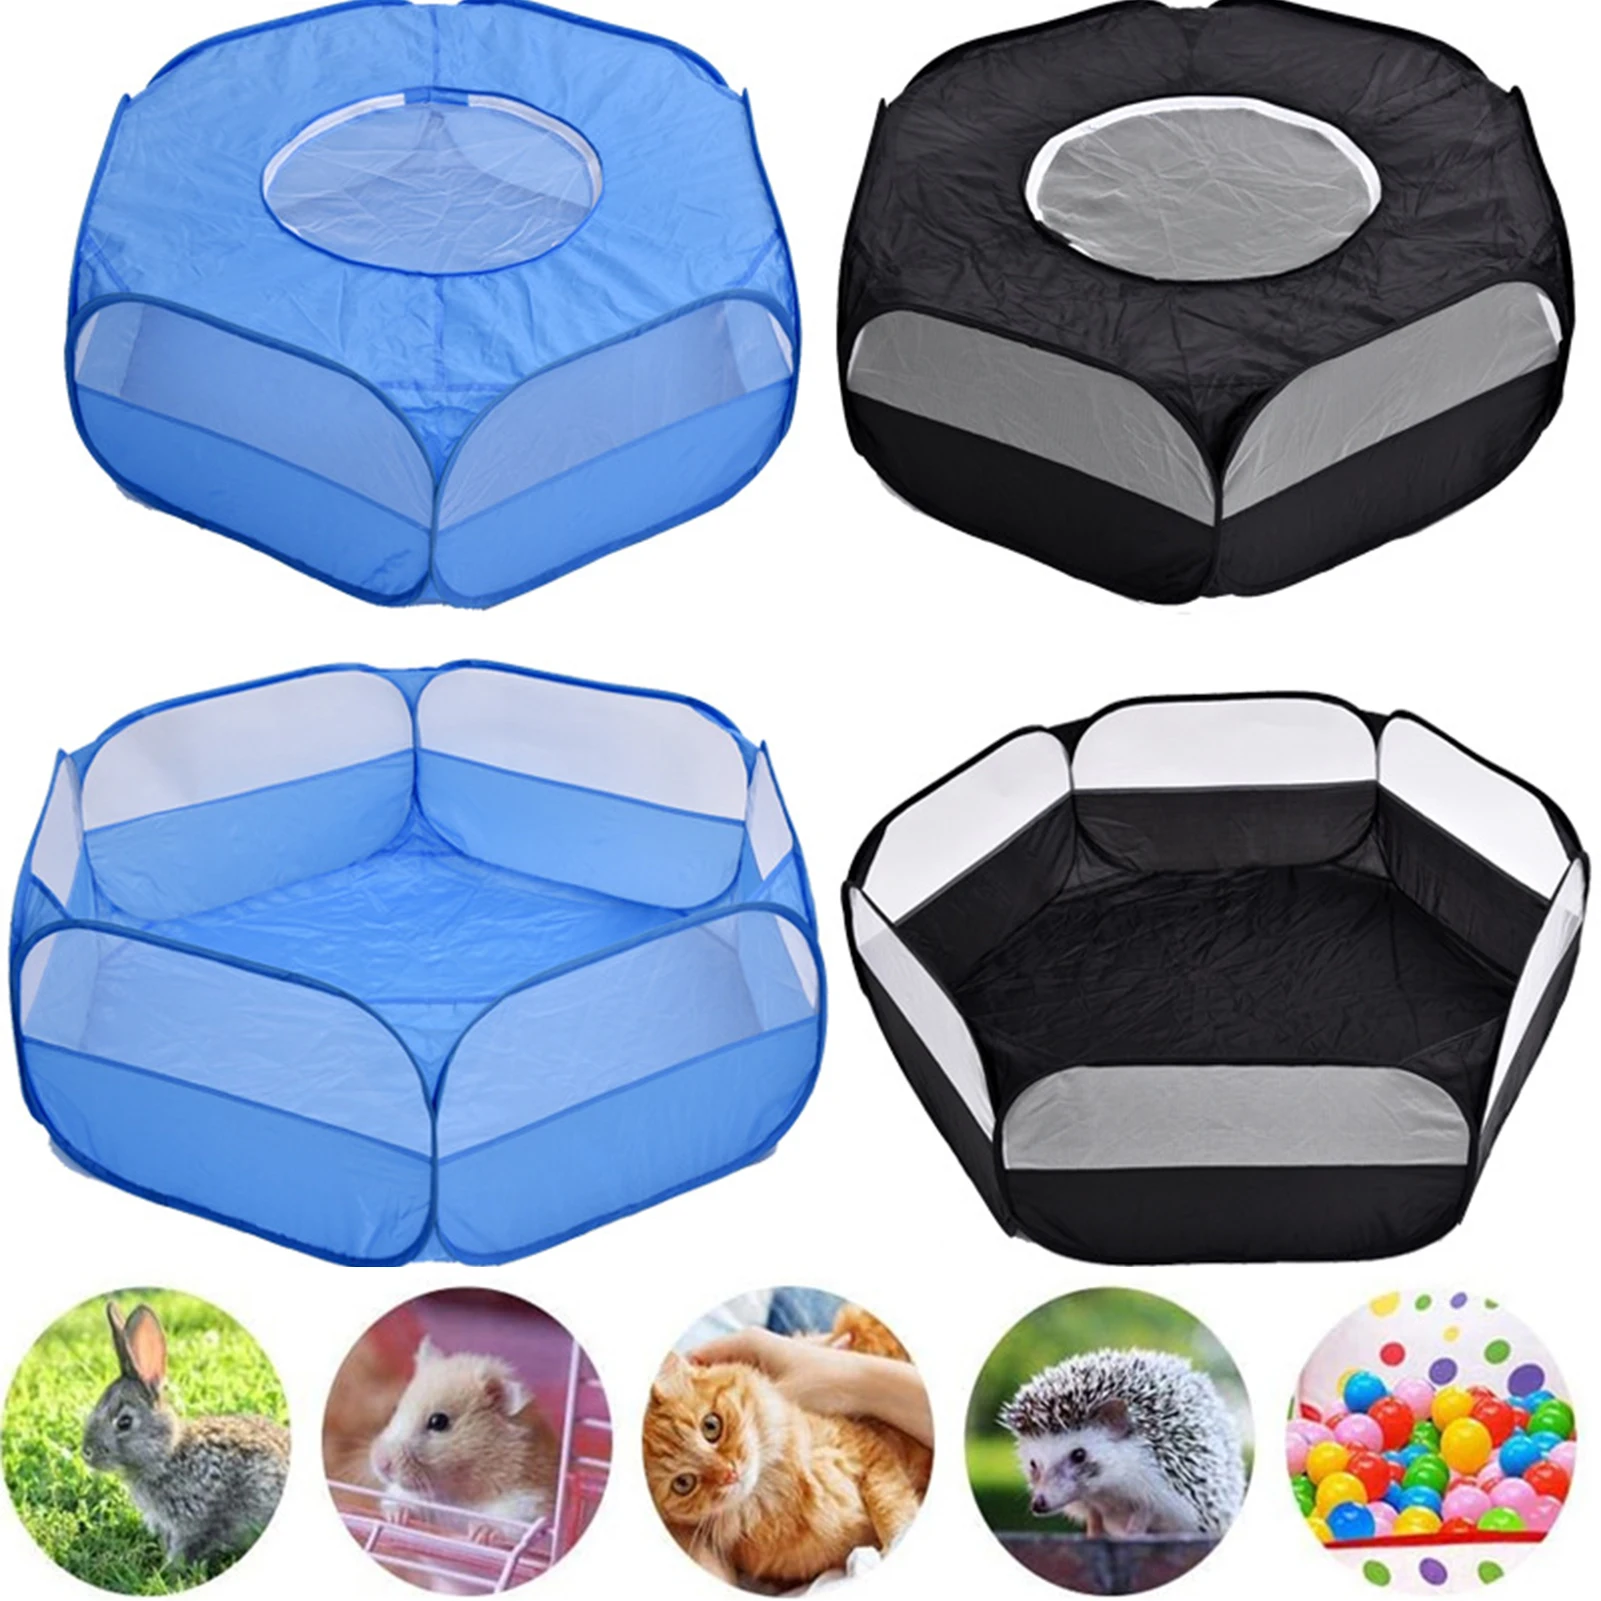 

Portable Small Pet Cage Folding Tent Pet Playpen Open Yard Fence For Dog Hamster Rabbit Guinea Pig Outdoor or Indoor Exercise